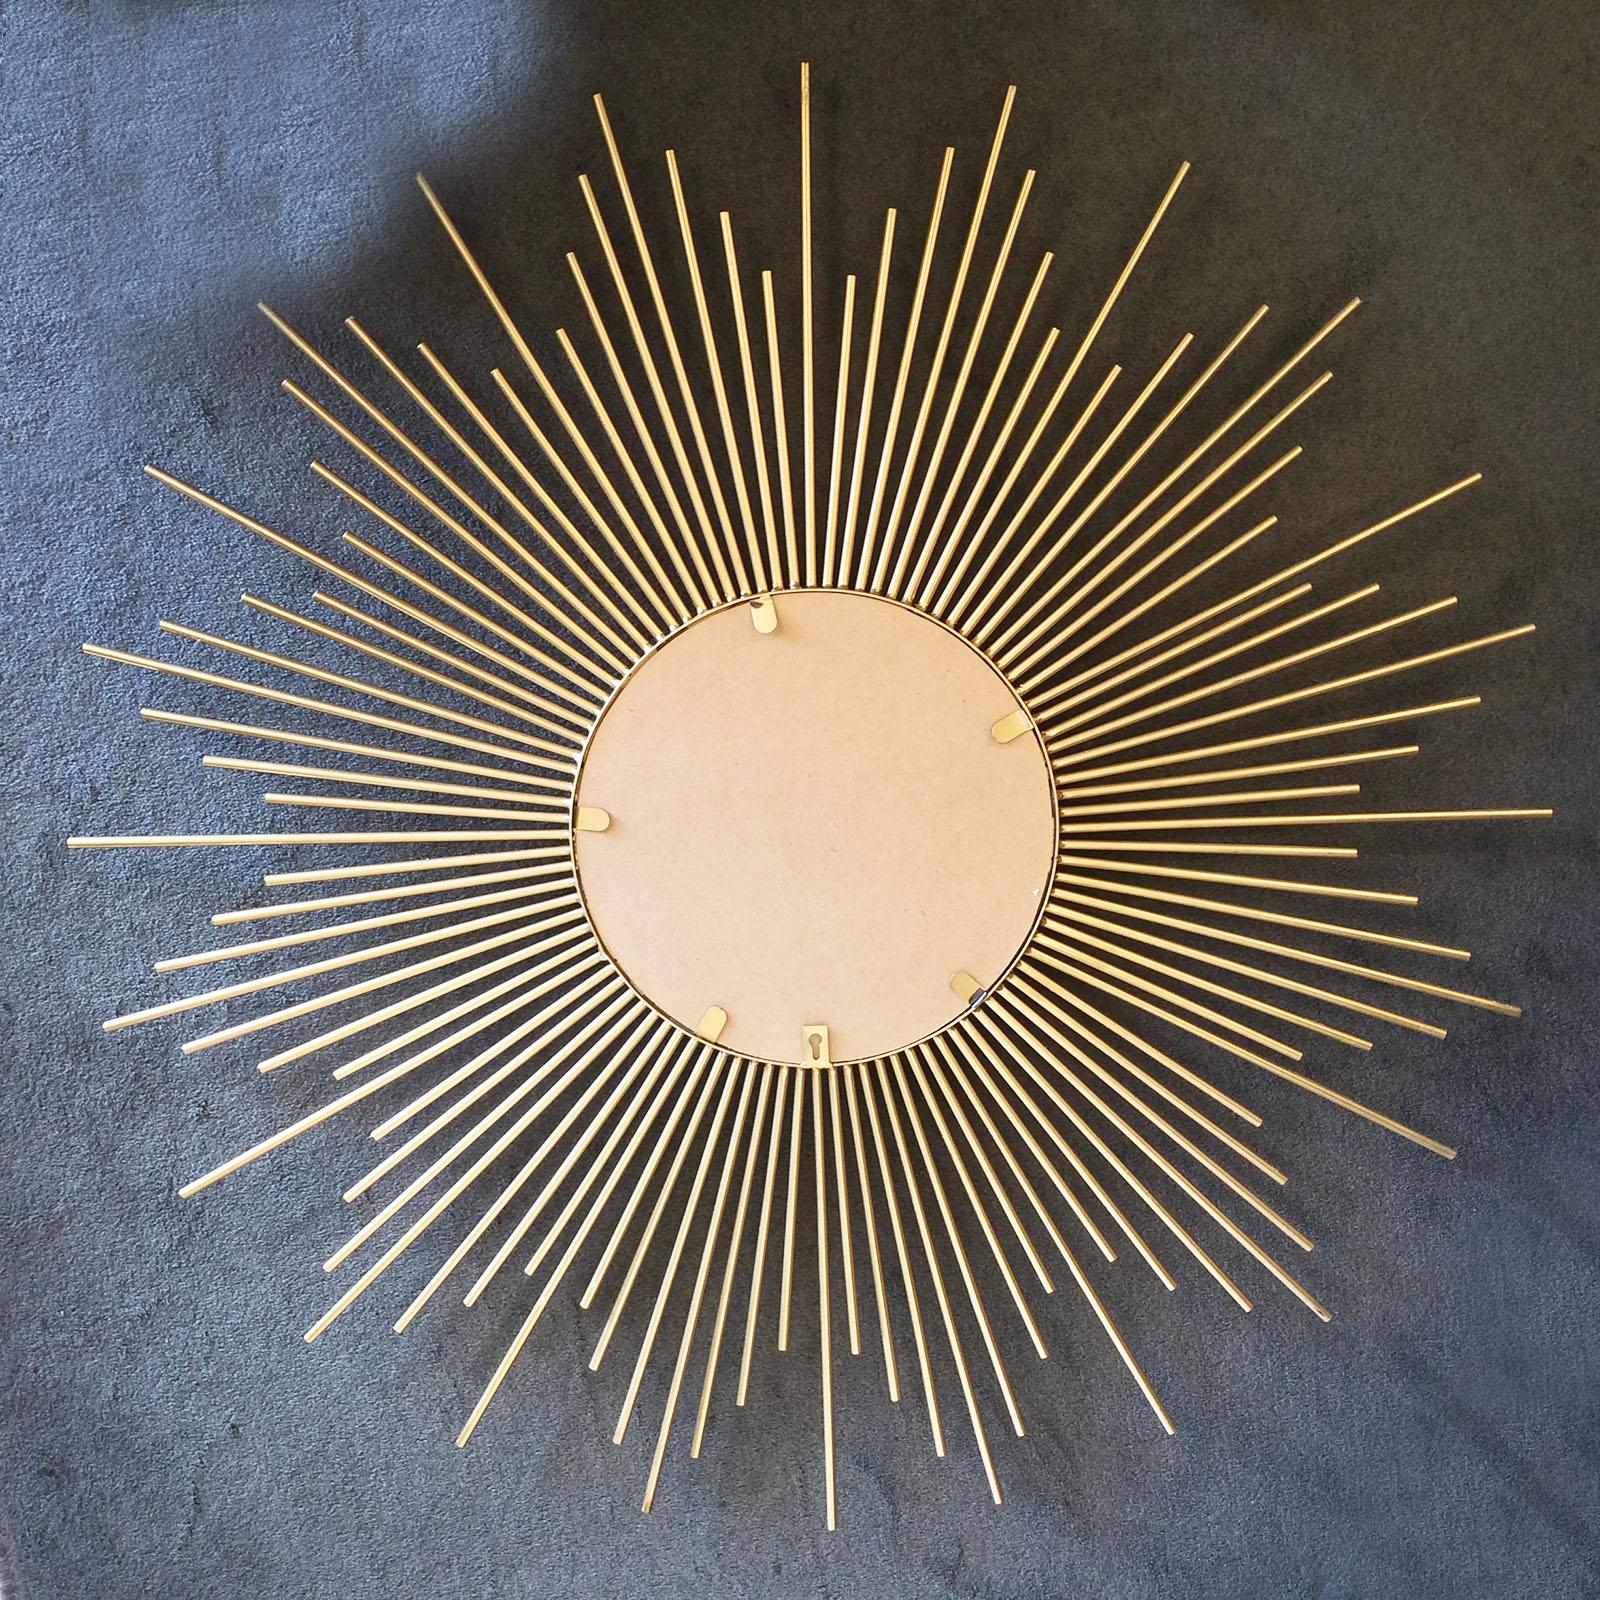 Midcentury large solid ray sunburst convex mirror. The old Commercial style “Mirror Sorciere’” (French), or “Magic Mirror” Immaculate condition, with no damage or deterioration to mirror, with the back being replaced in recent years, still perfect.